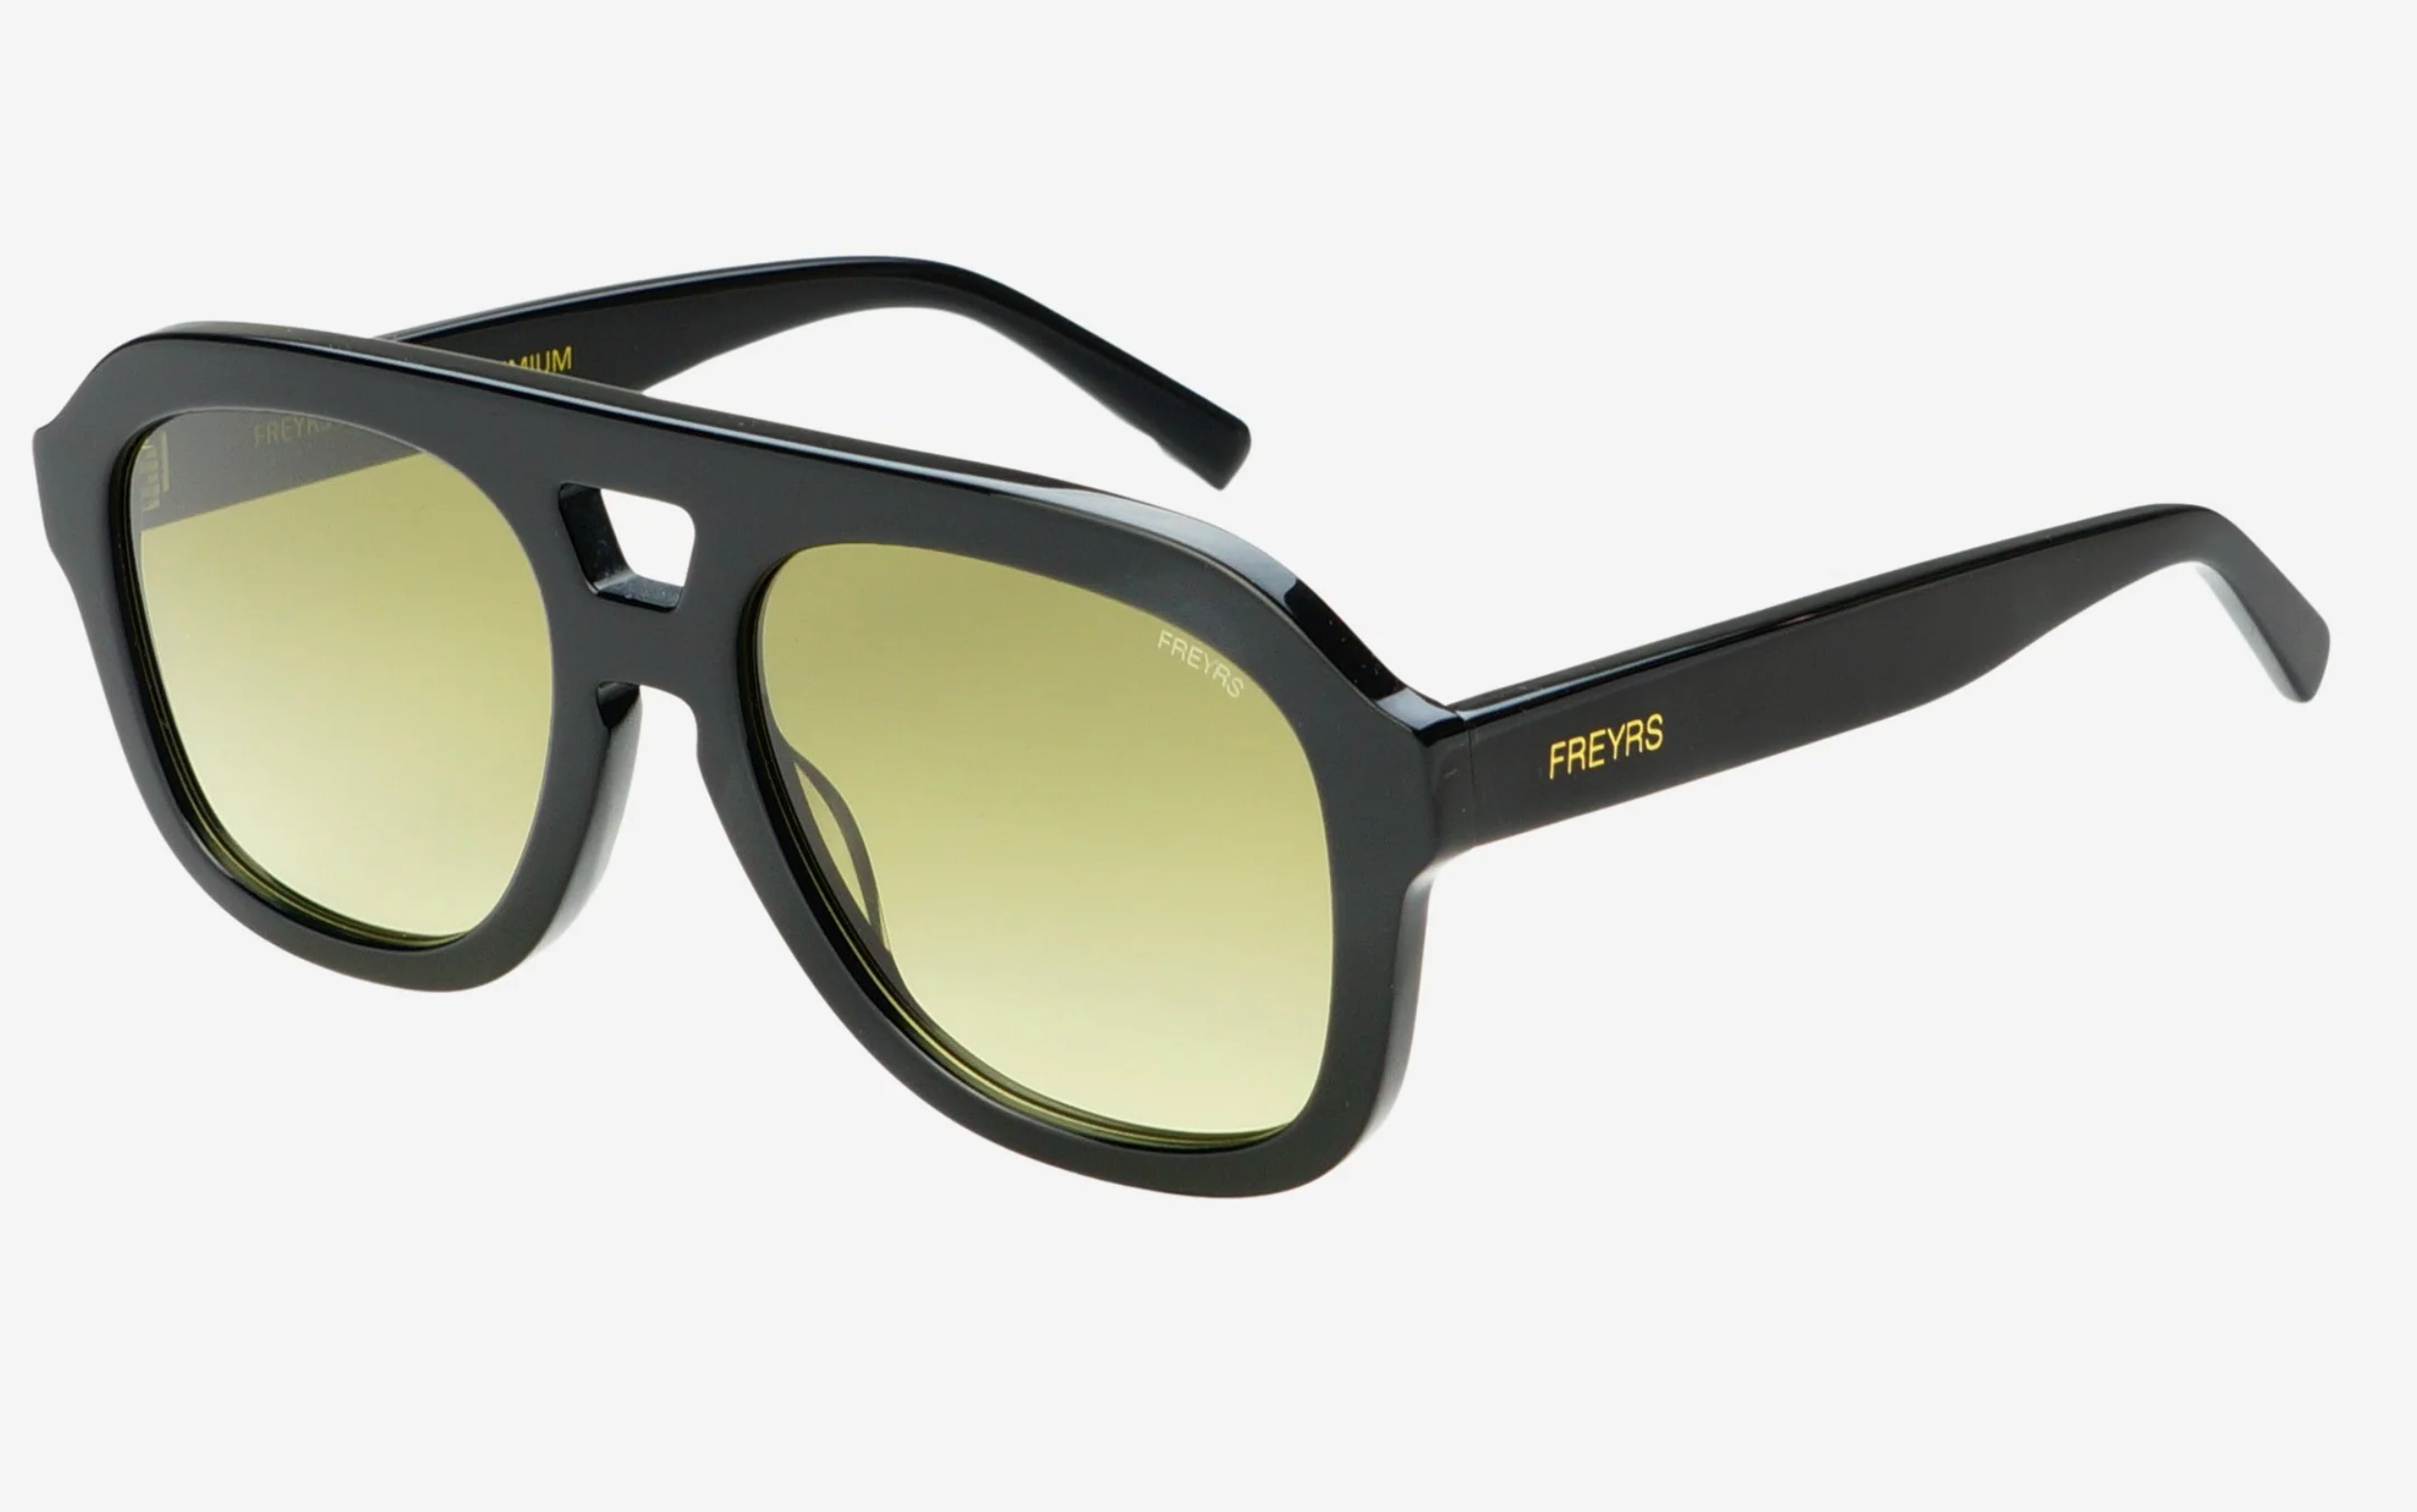 voyager freyrs sunglasses